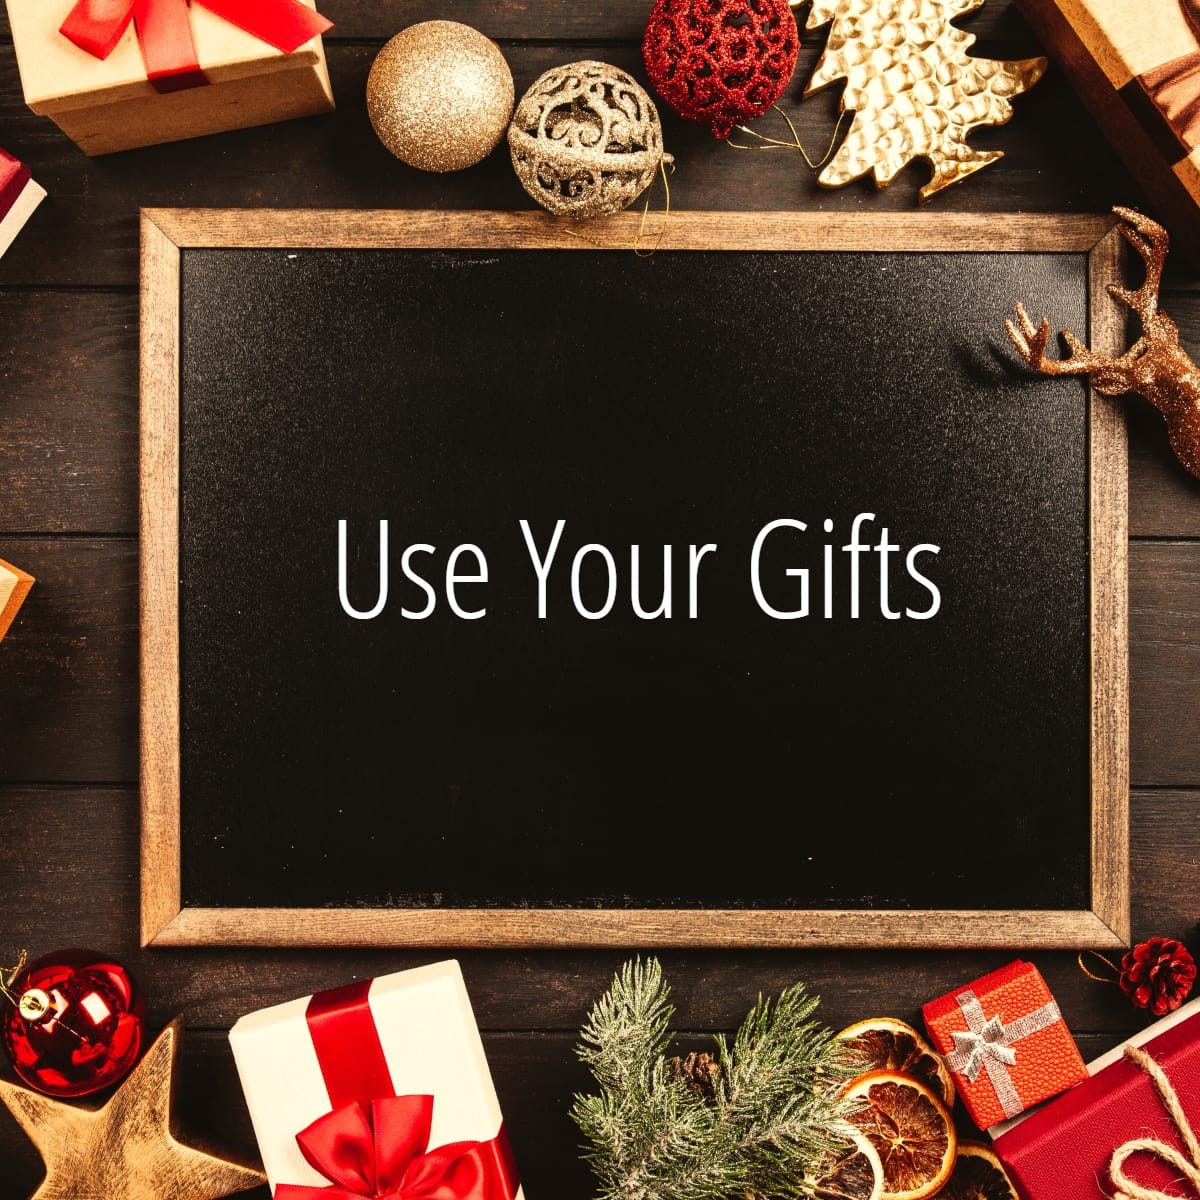 Use your gifts - Shalom101.com